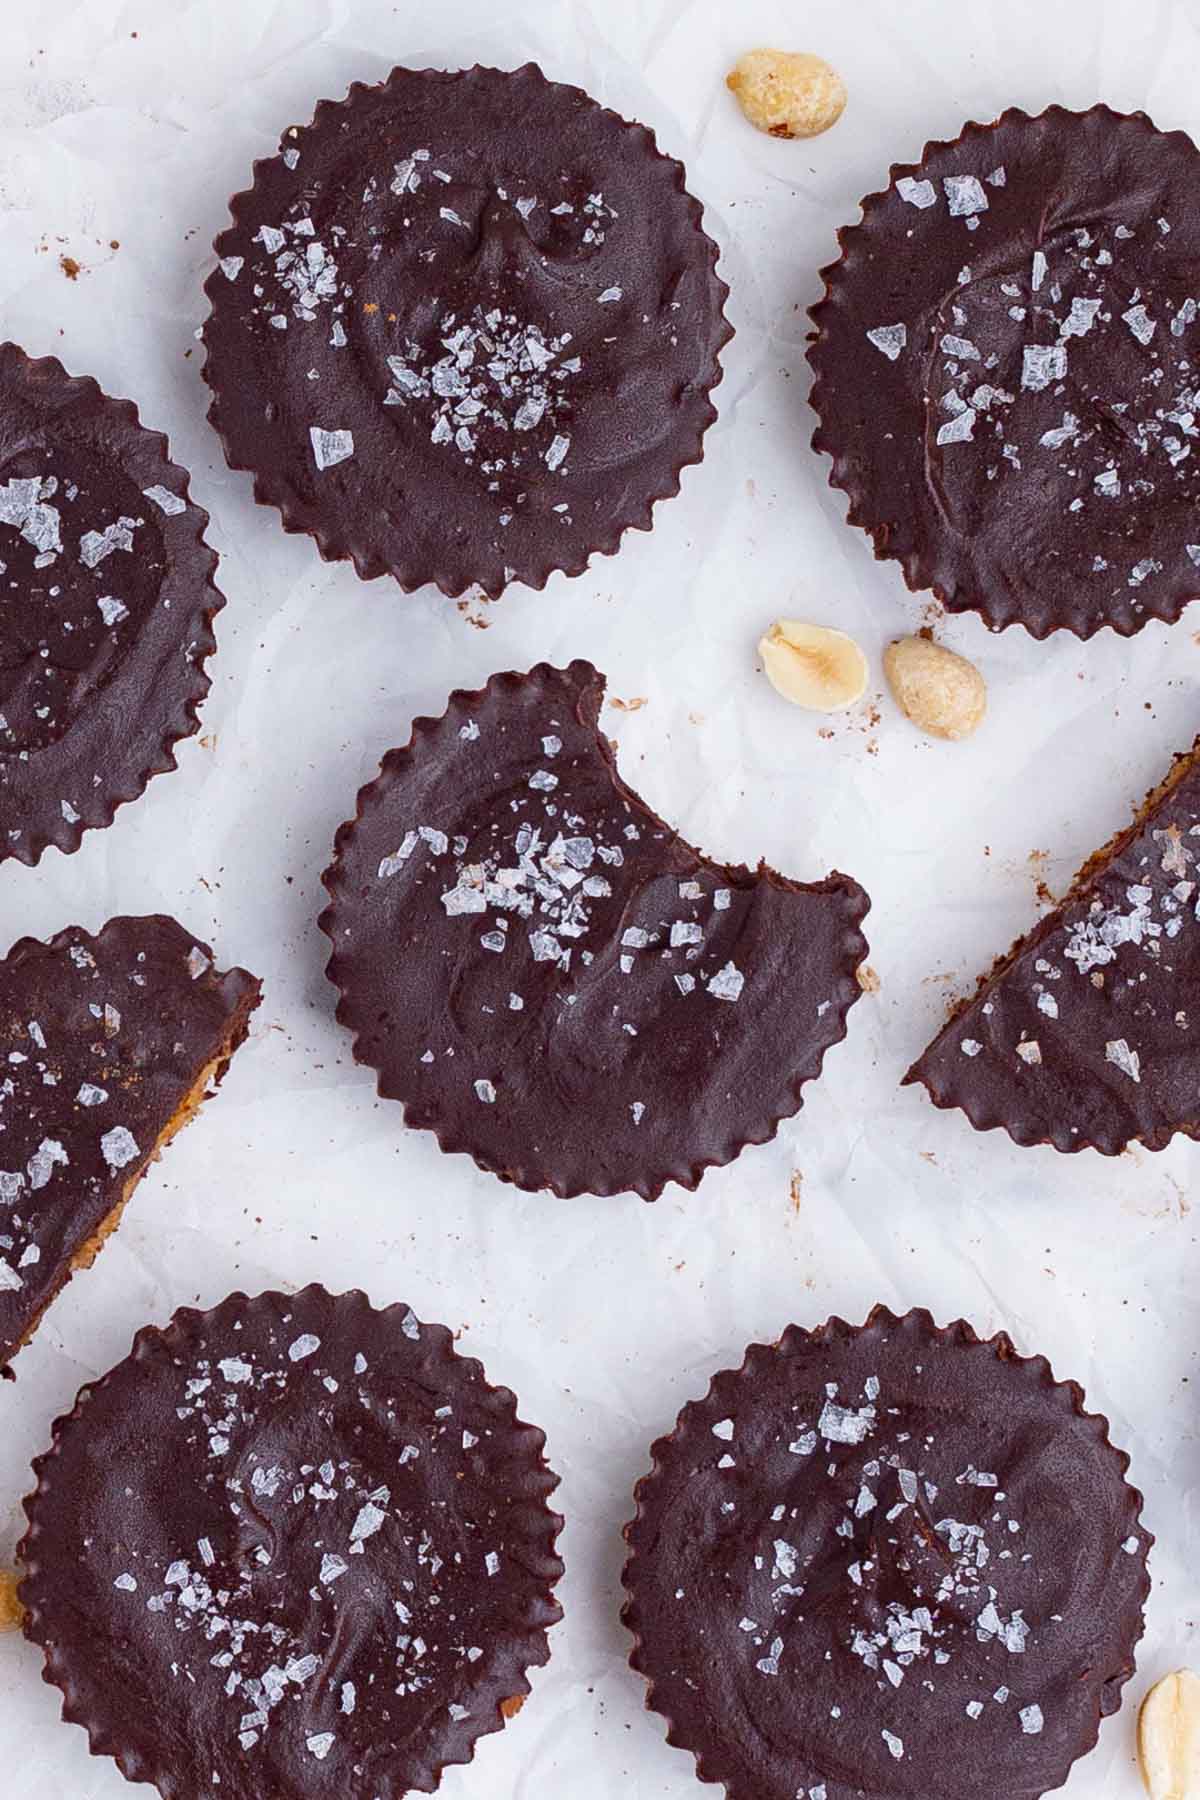 Flaky salt is used to top these homemade peanut butter cups.